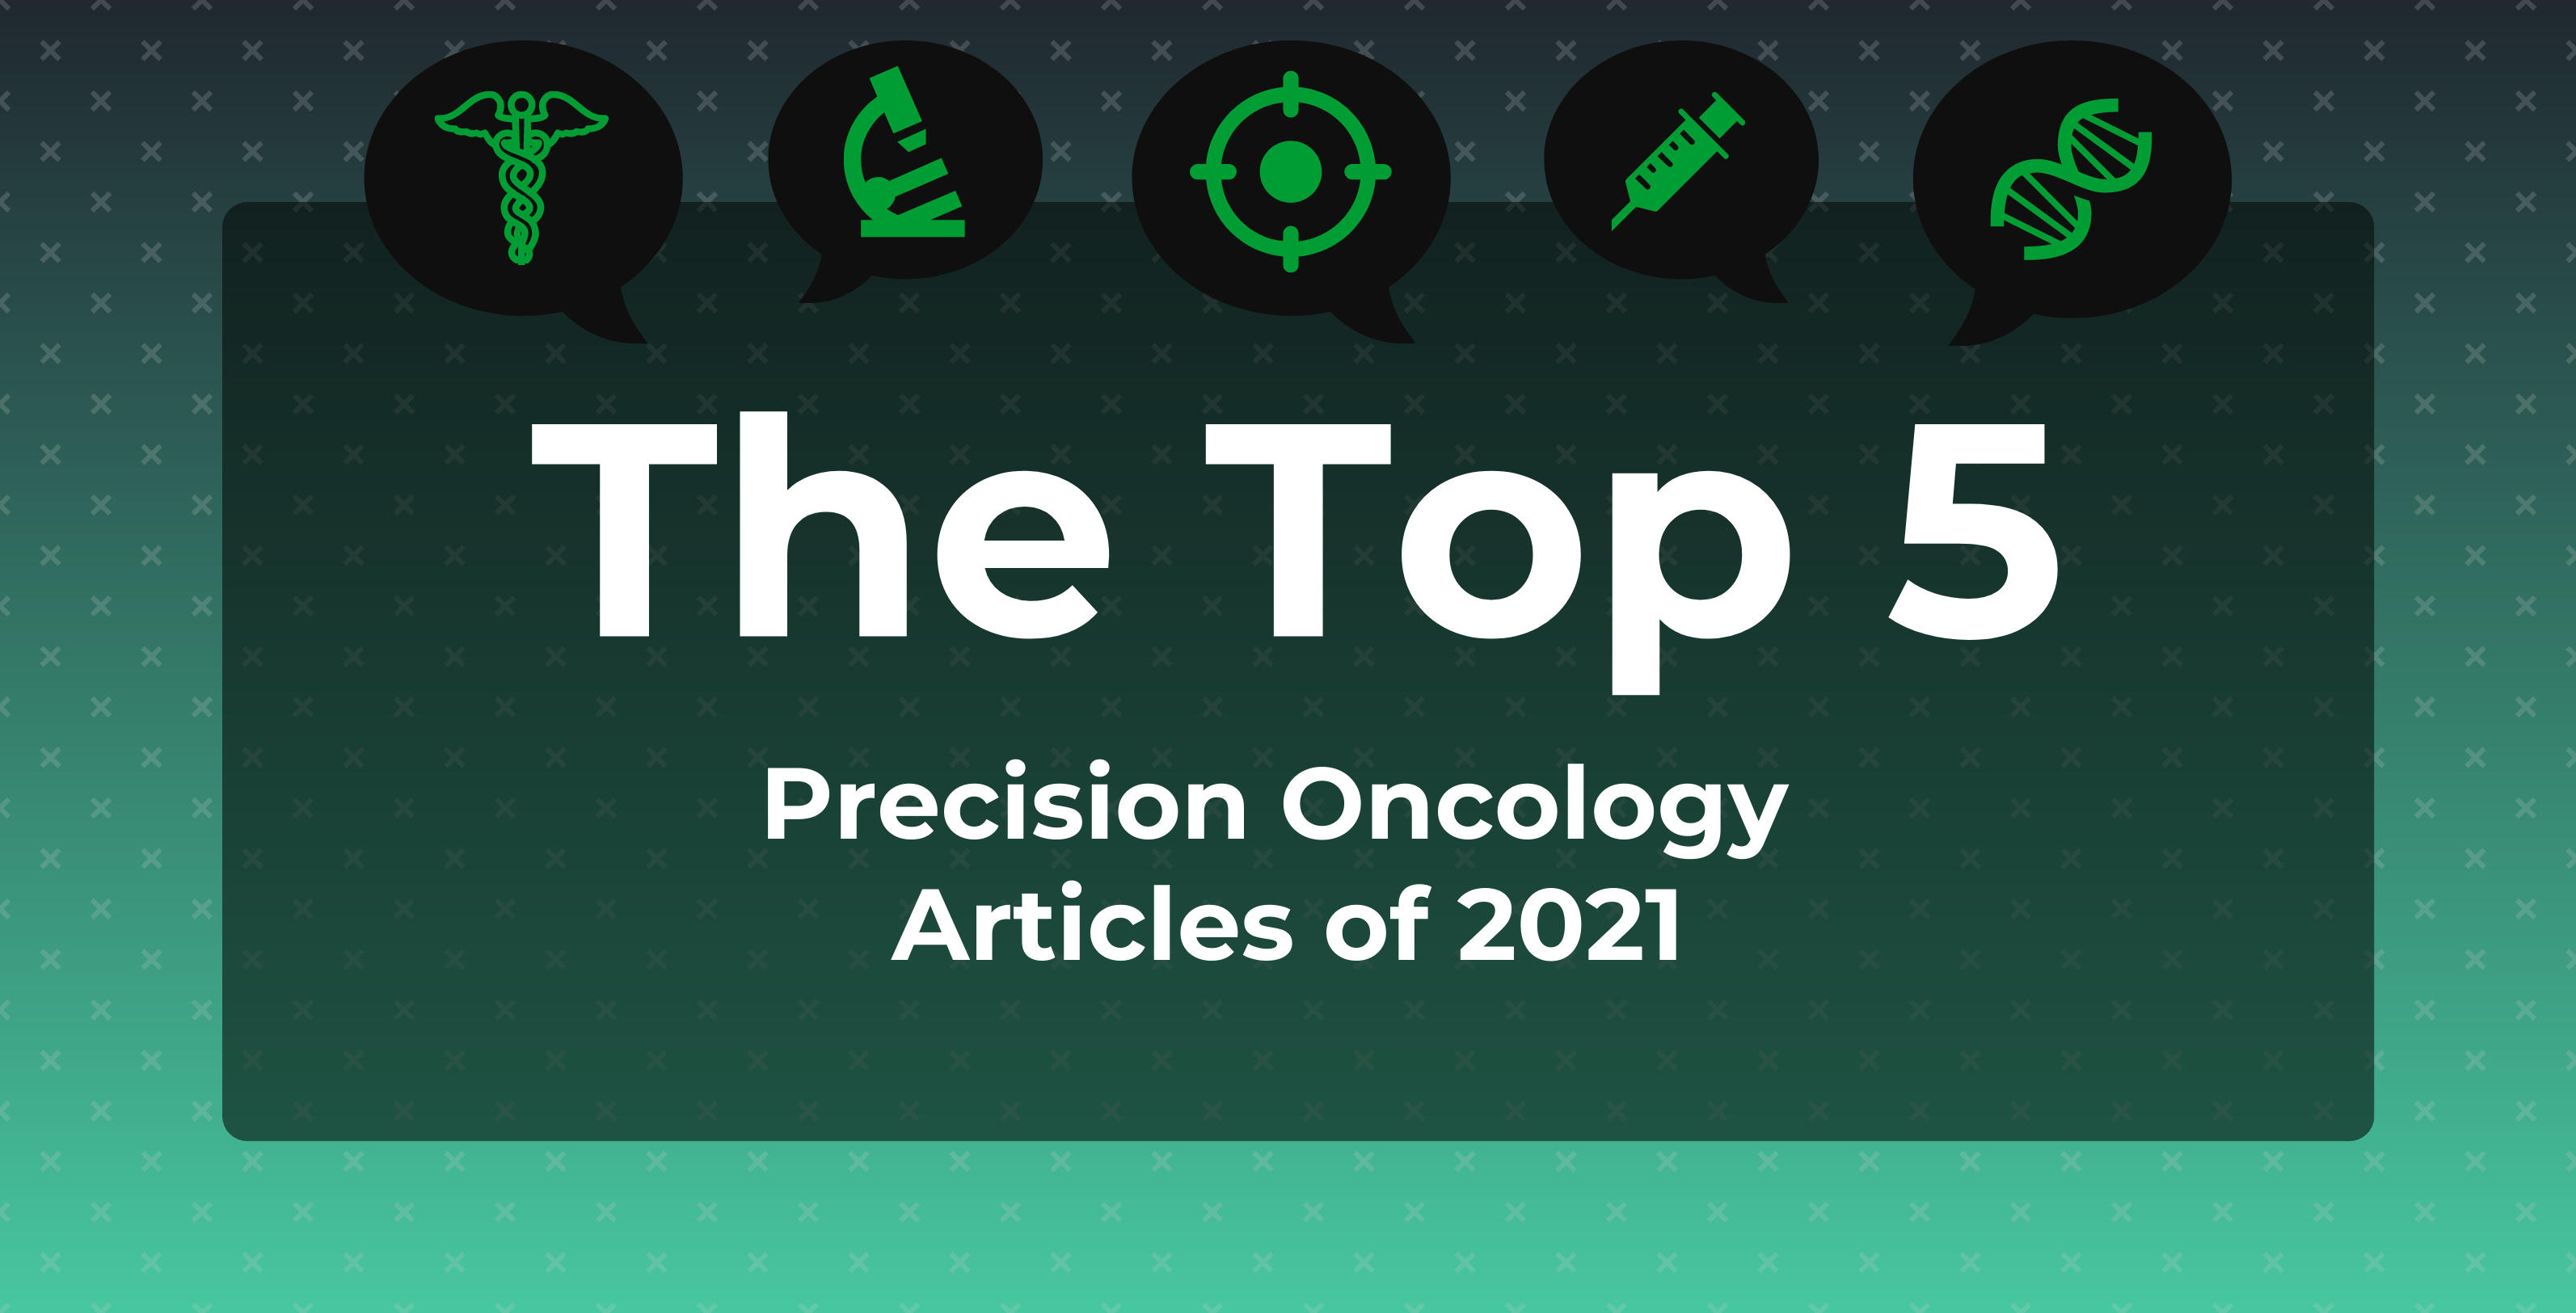 Top 5 Most-Read Articles in Precision Oncology for 2021